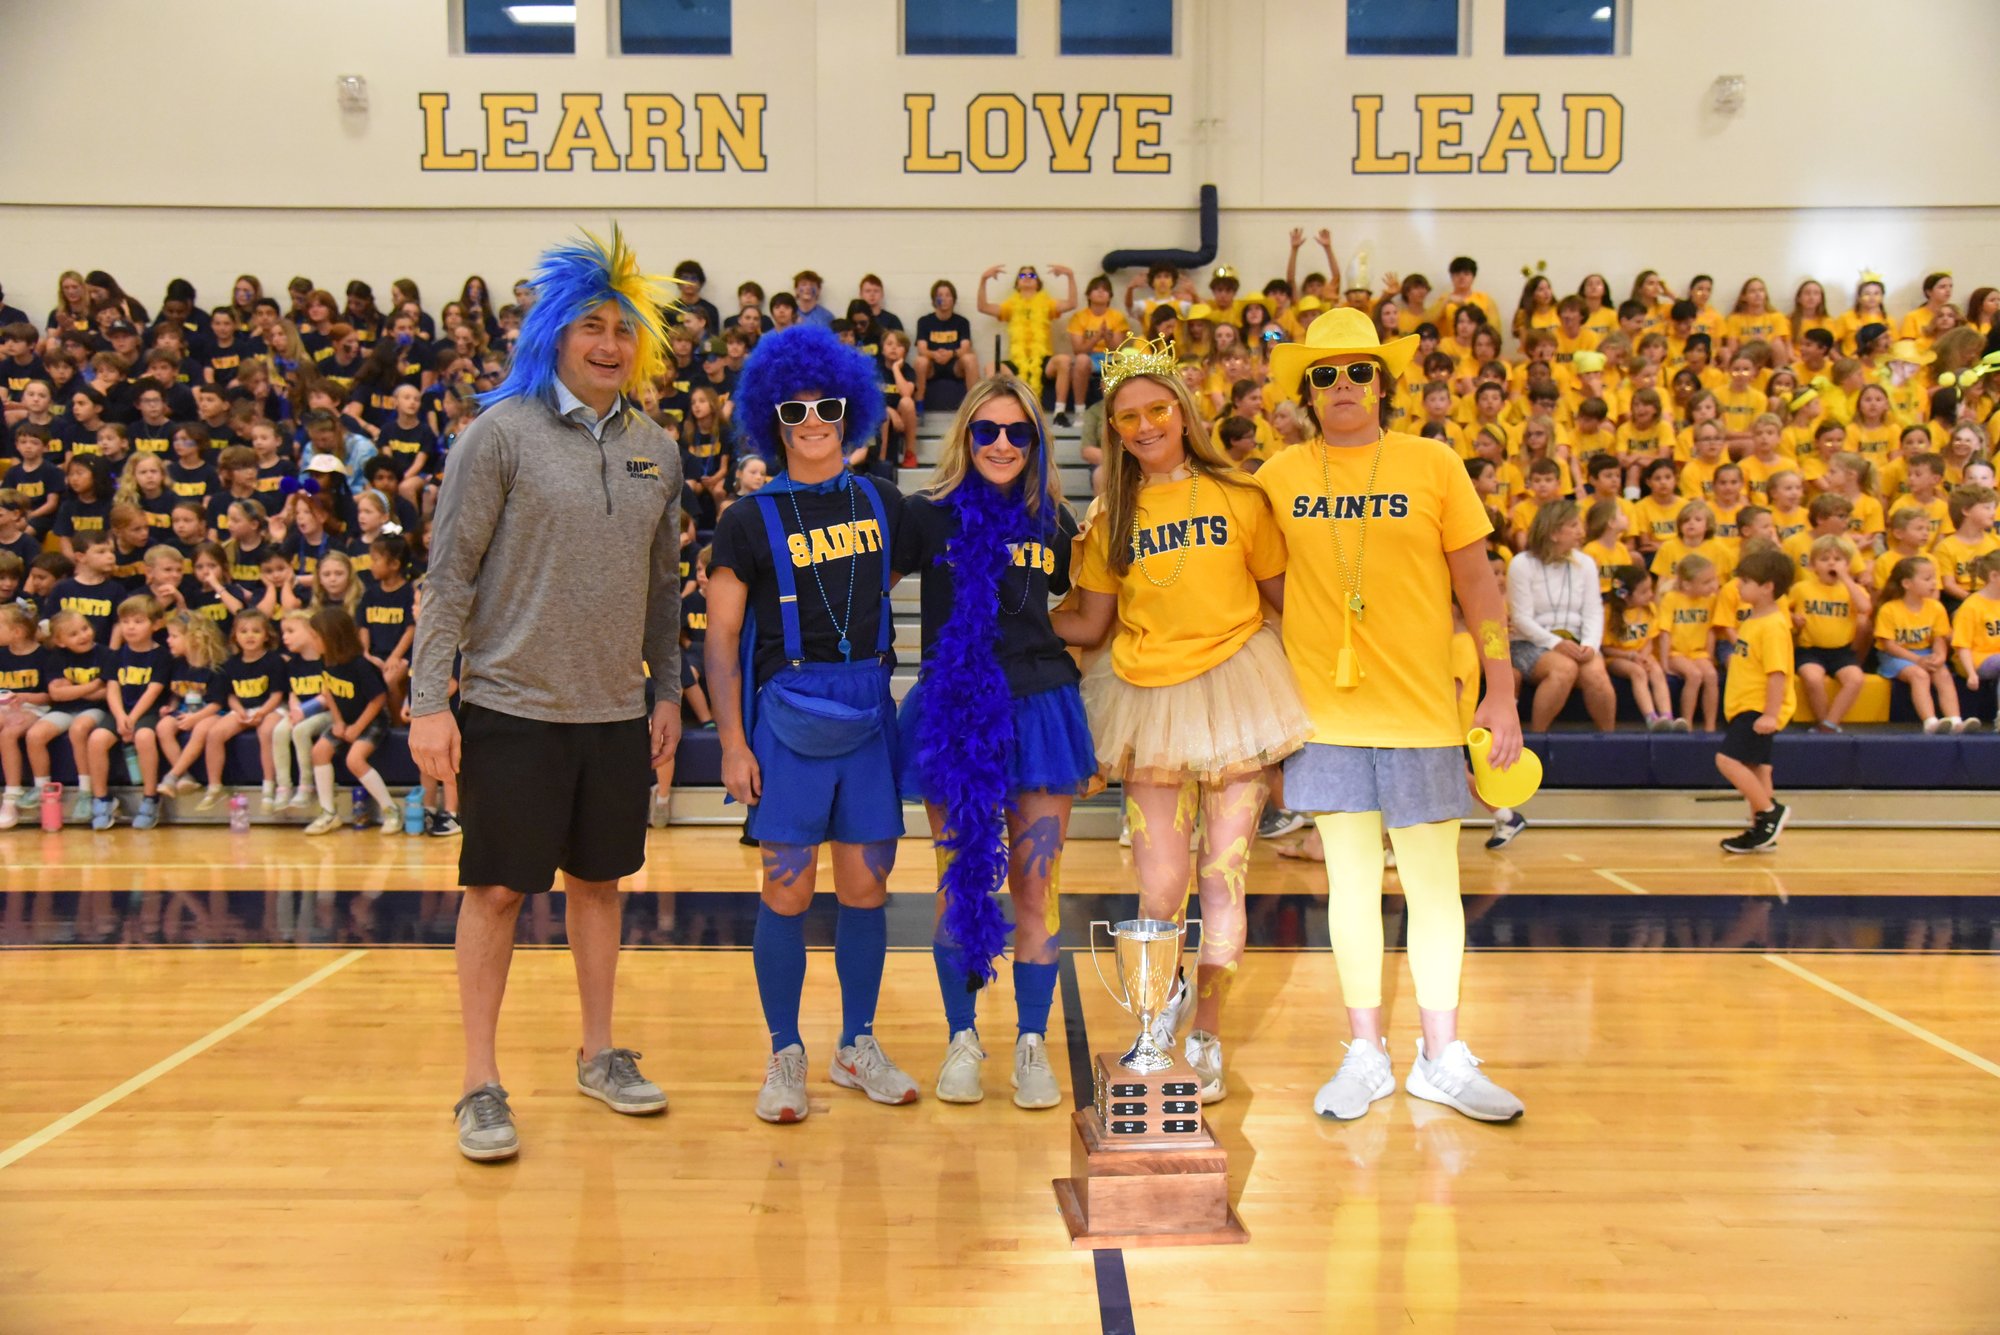 Students and faculty at a pep rally wearing costumes and wigs.